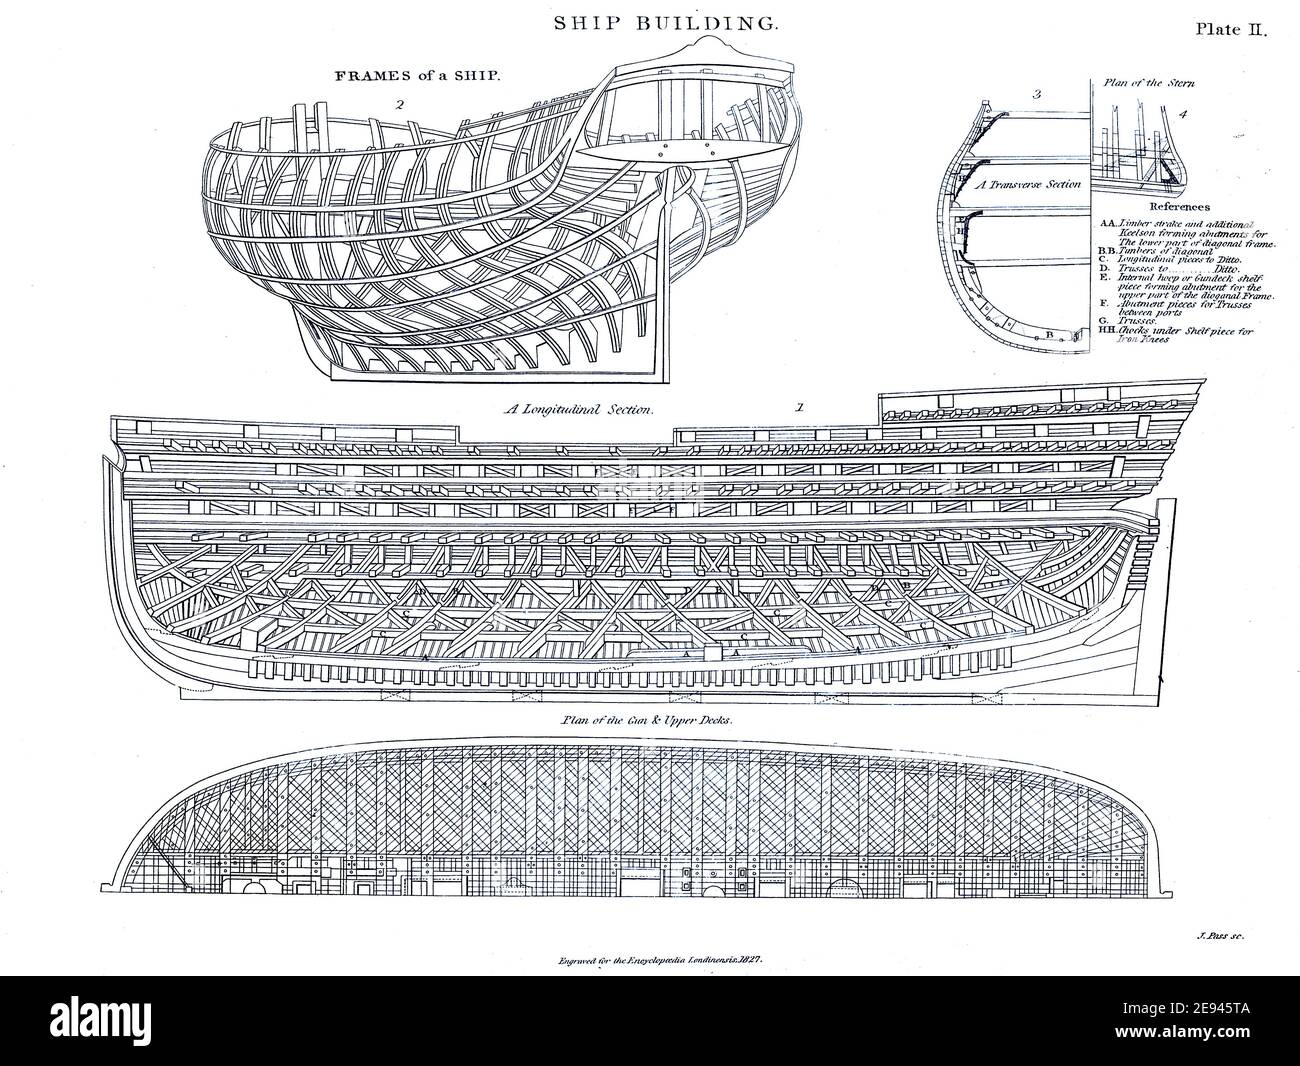 Ship design and building Copperplate engraving From the Encyclopaedia Londinensis or, Universal dictionary of arts, sciences, and literature; Volume XXIII;  Edited by Wilkes, John. Published in London in 1828 Stock Photo